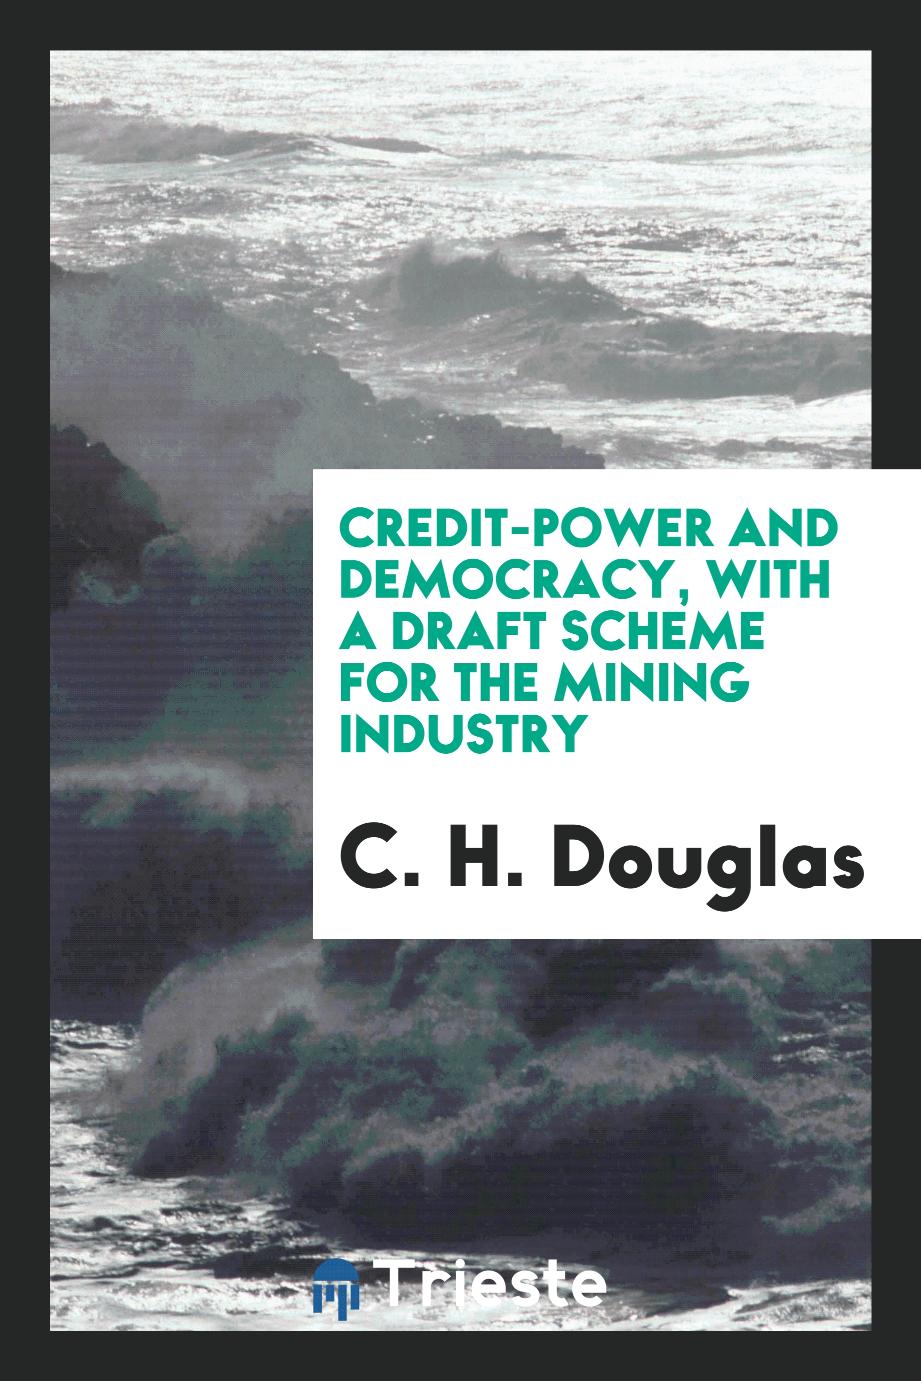 Credit-power and democracy, with a draft scheme for the mining industry